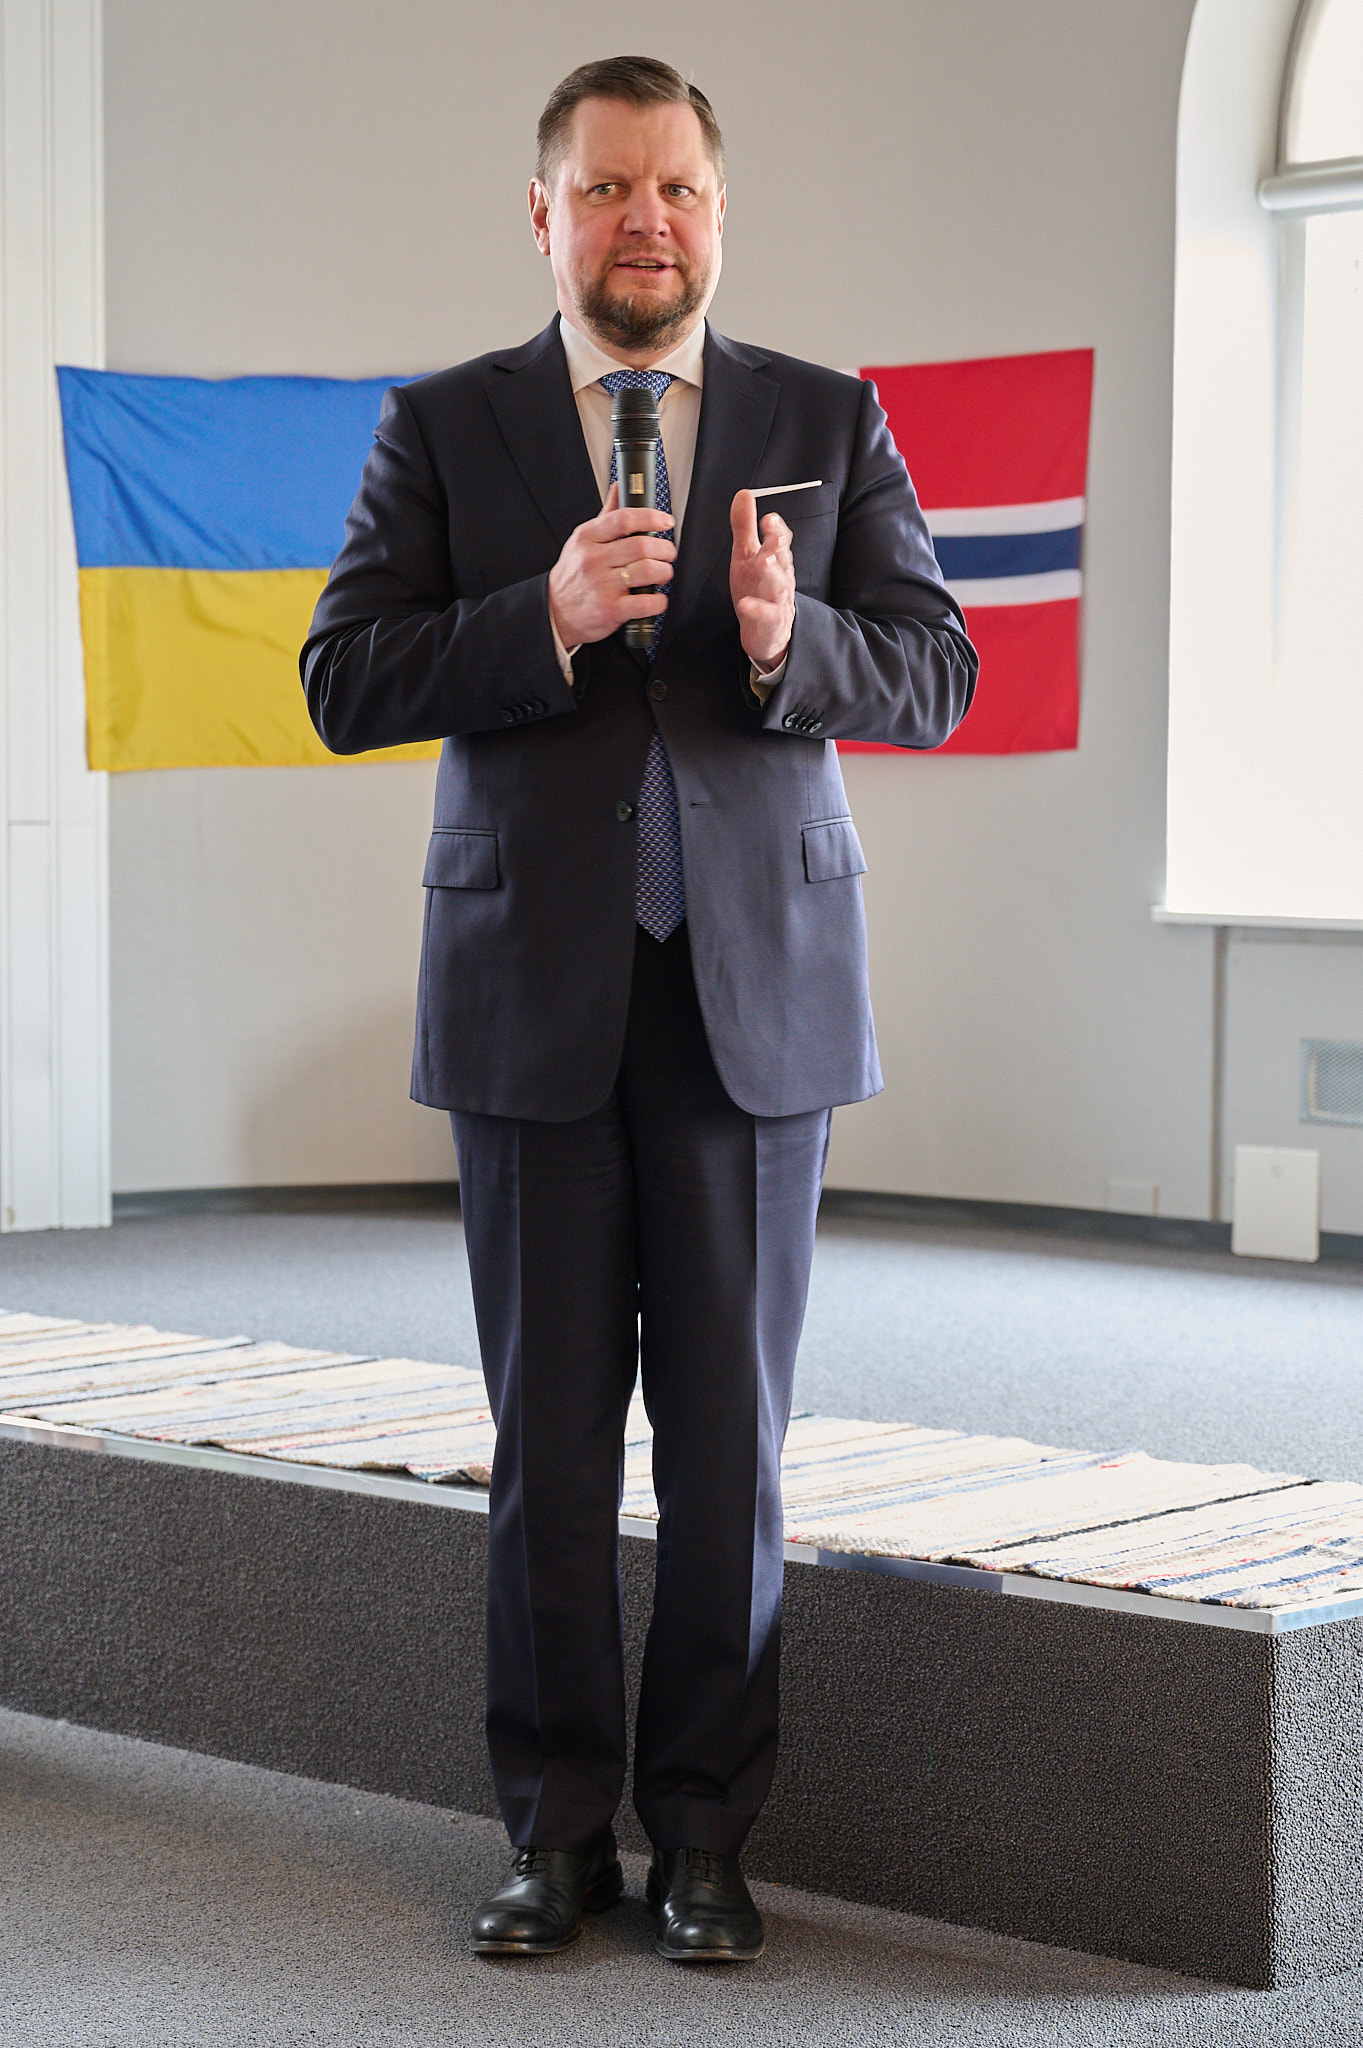 Ukraine´s Ambassador to Norway, His Excellency Vlacheslav Yatsluk congratulated and thanked all who had participated in establishing the information centre. Photo: Willy Fredriksen